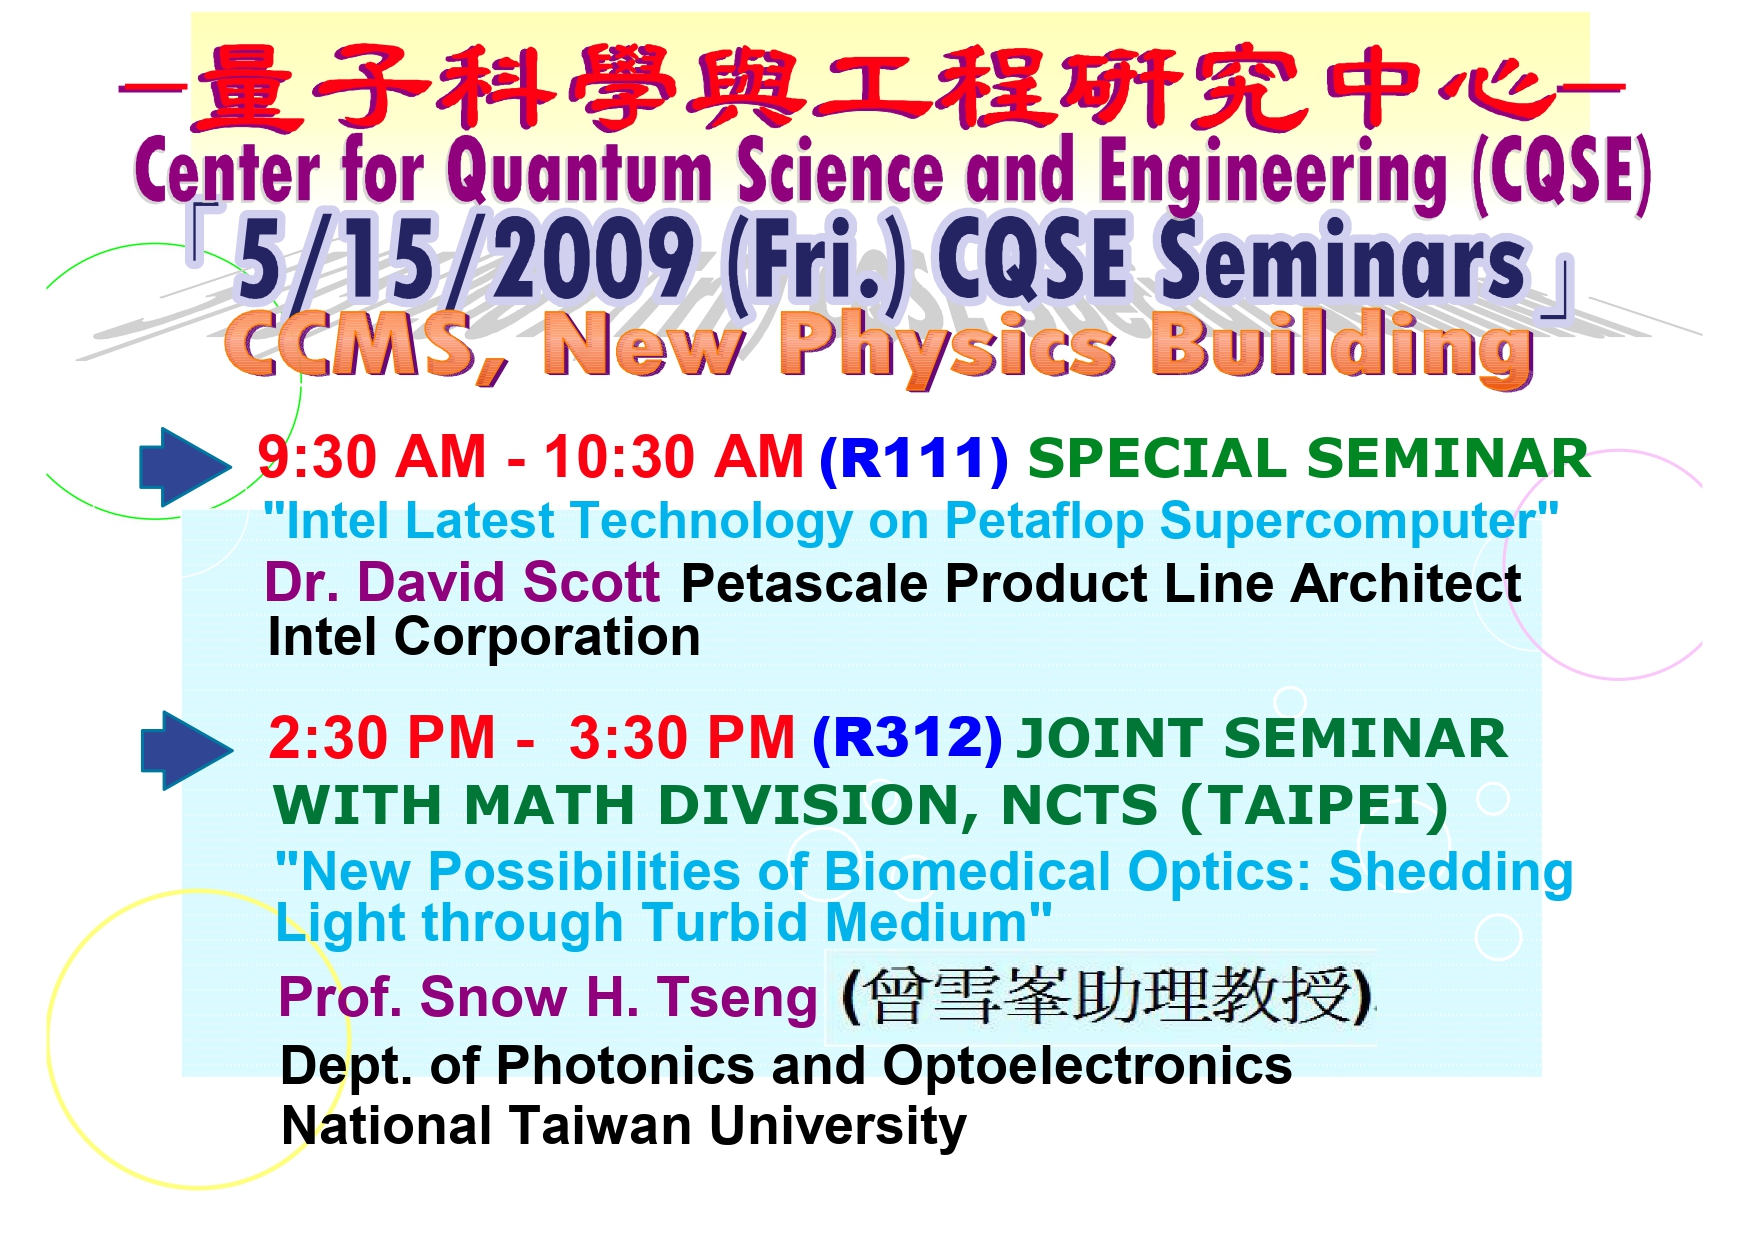 Weekly/Special Seminars of Center for Quantum Science and Engineering (CQSE)